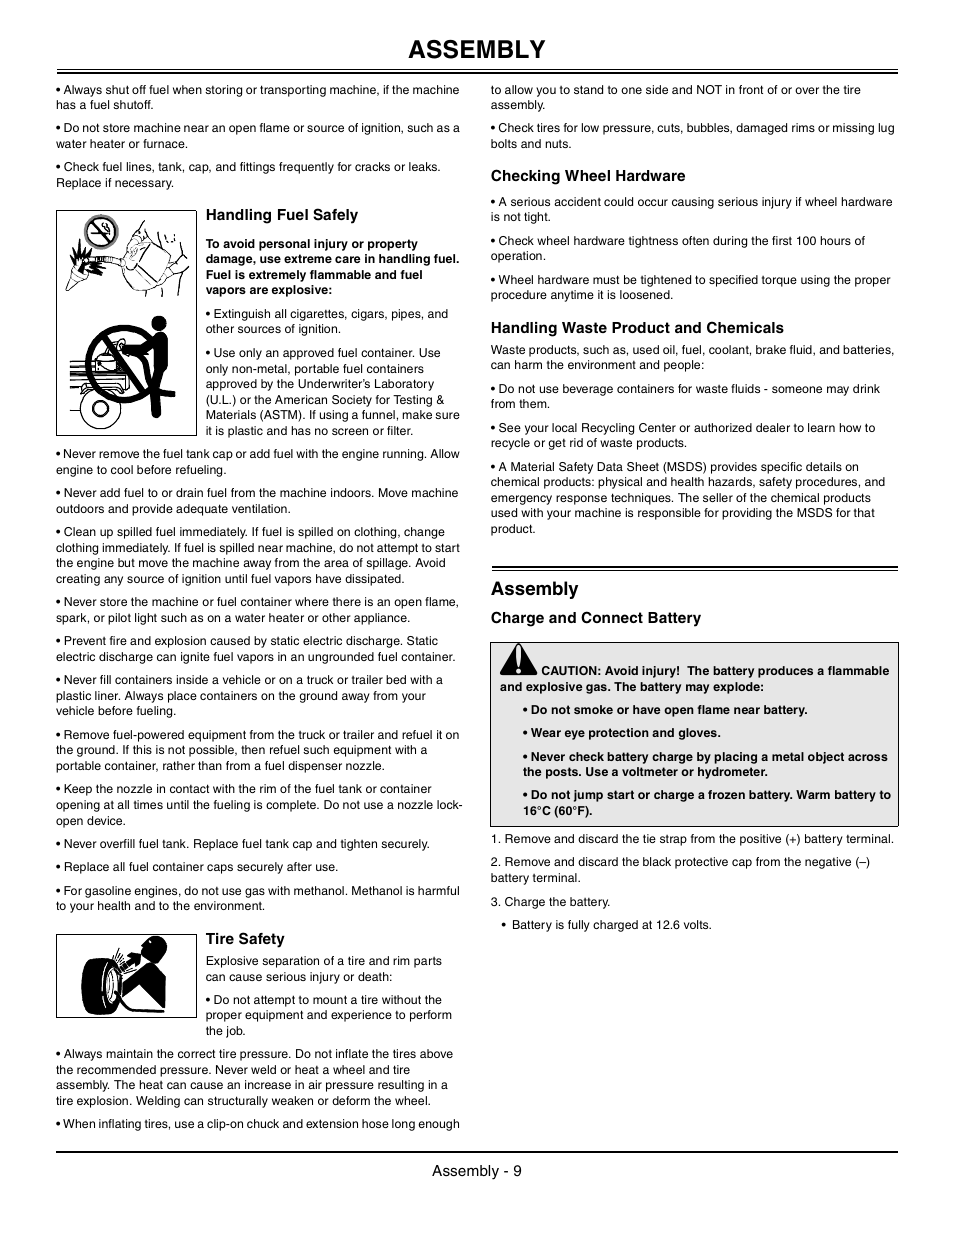 Handling fuel safely, Tire safety, Checking wheel hardware | Handling waste product and chemicals, Assembly, Charge and connect battery | John Deere la105 User Manual | Page 10 / 52